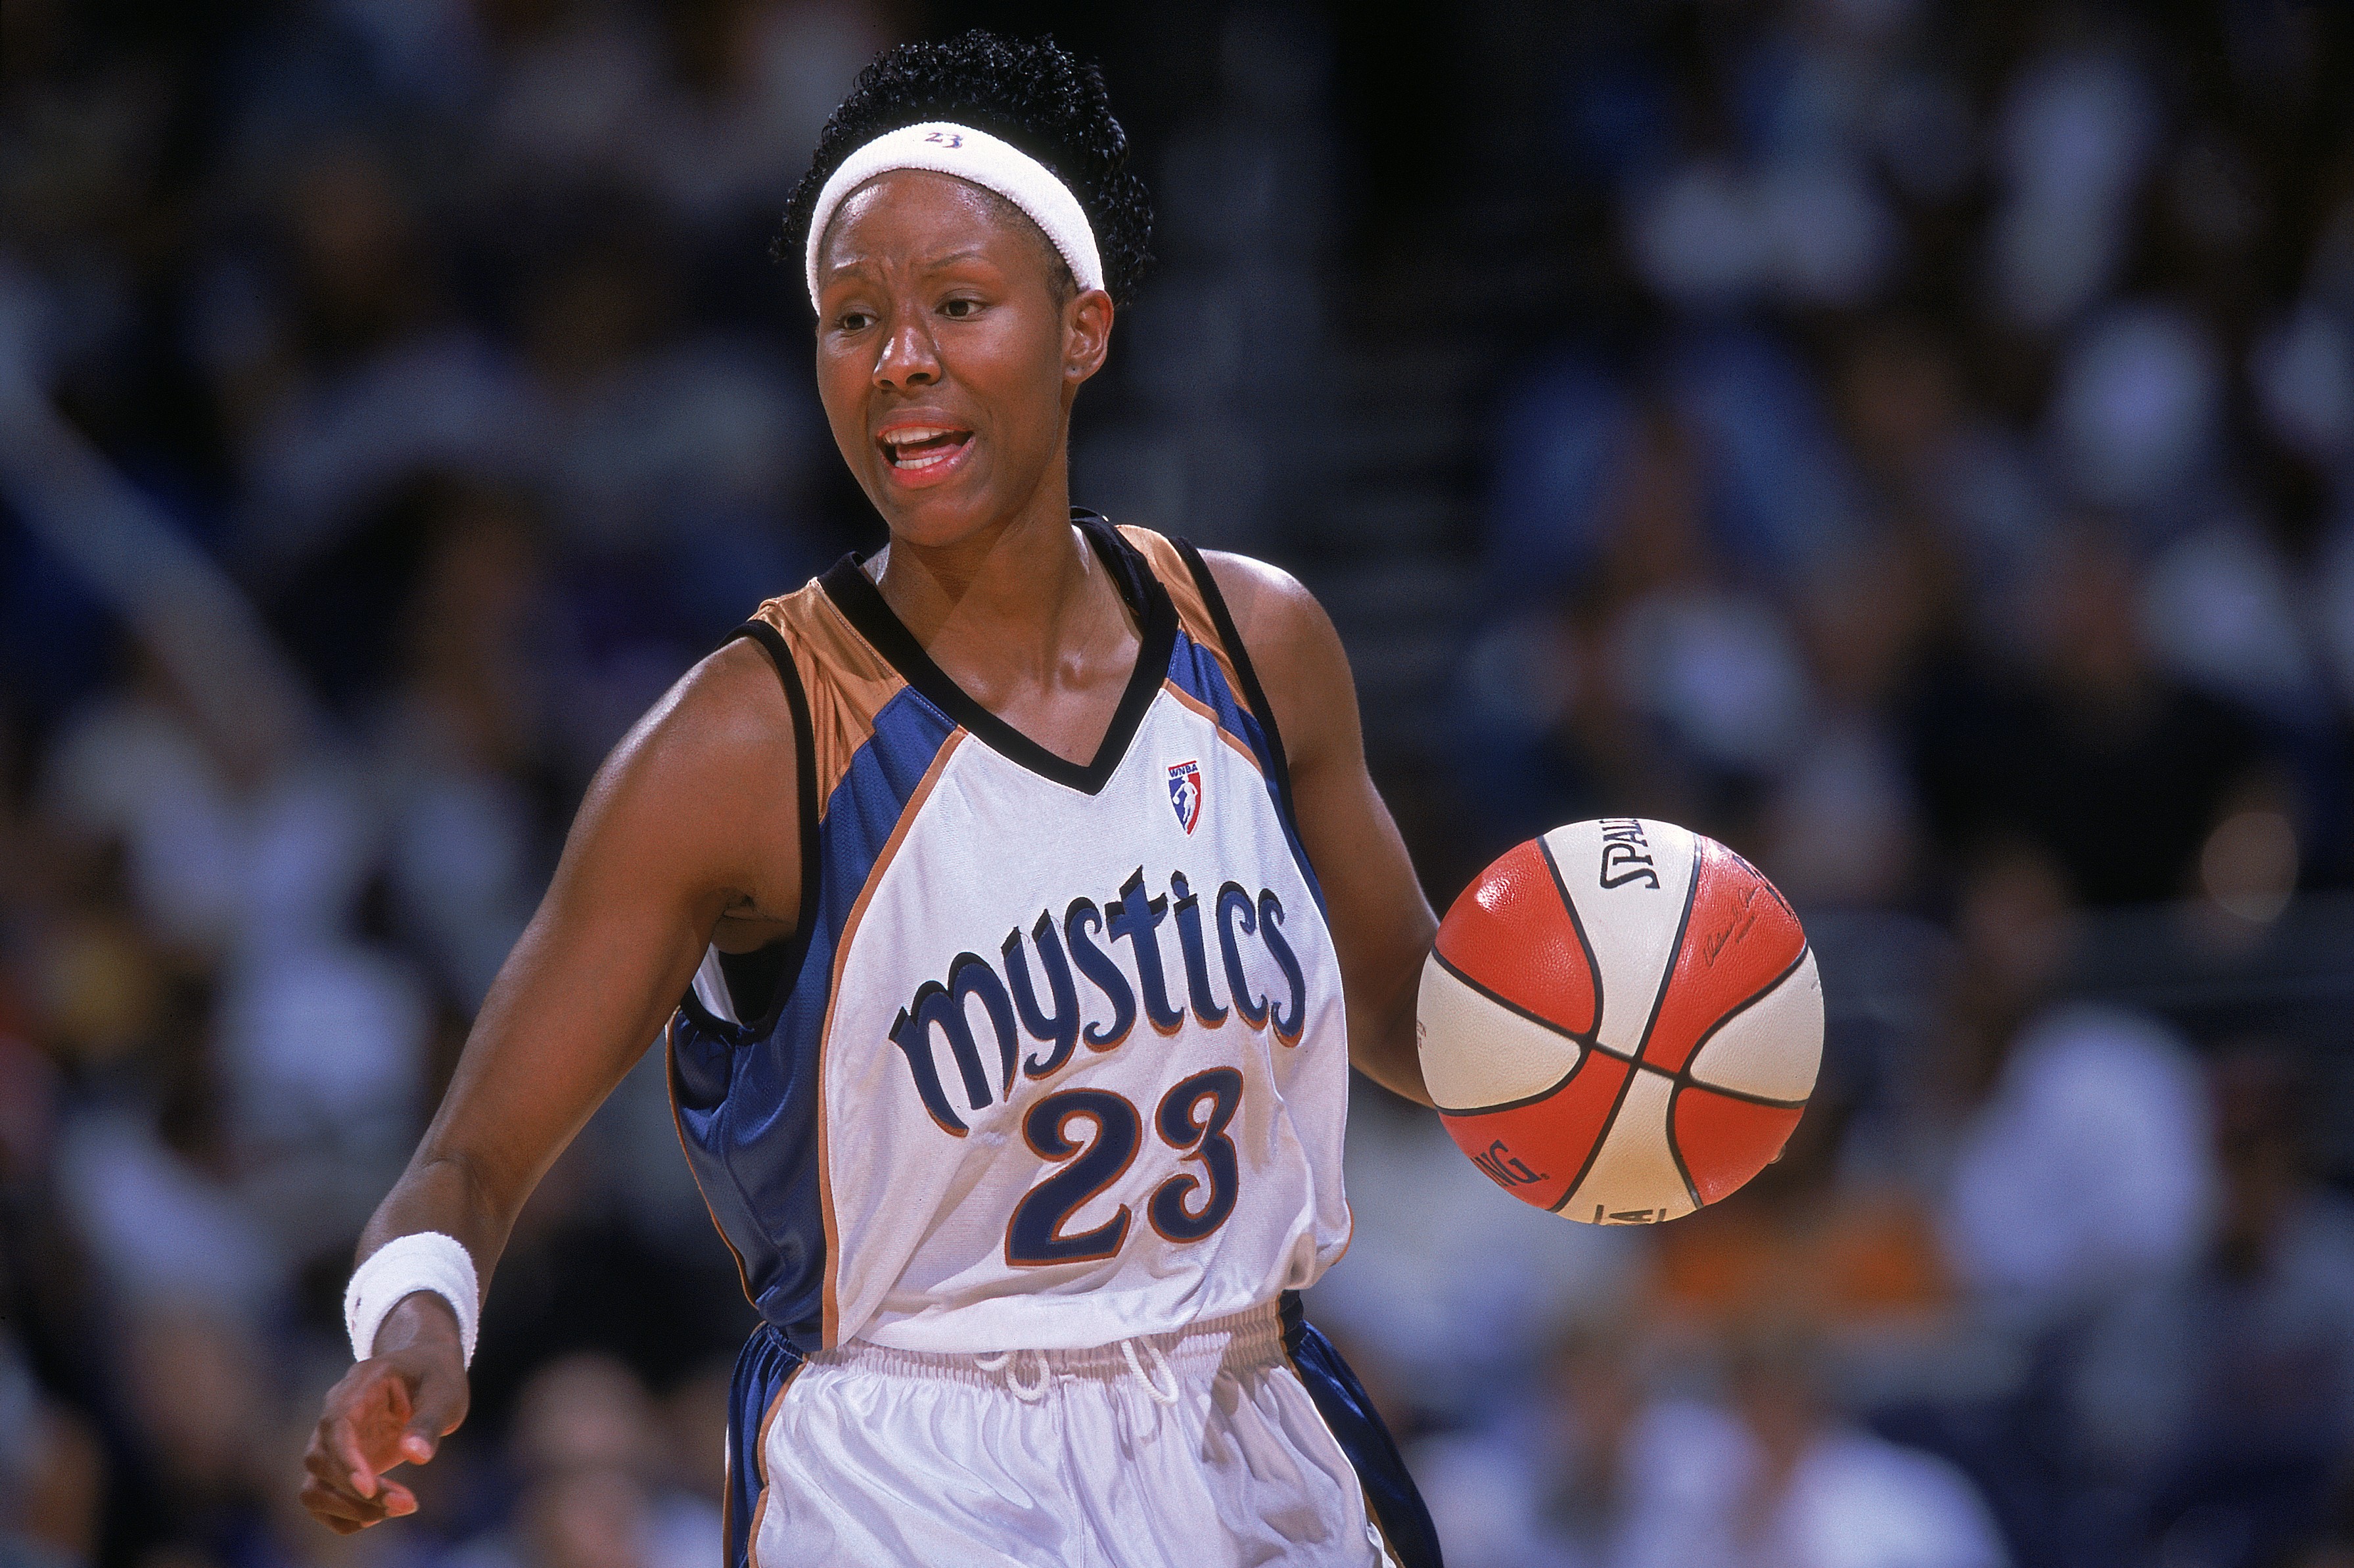 Chamique Holdsclaw #23